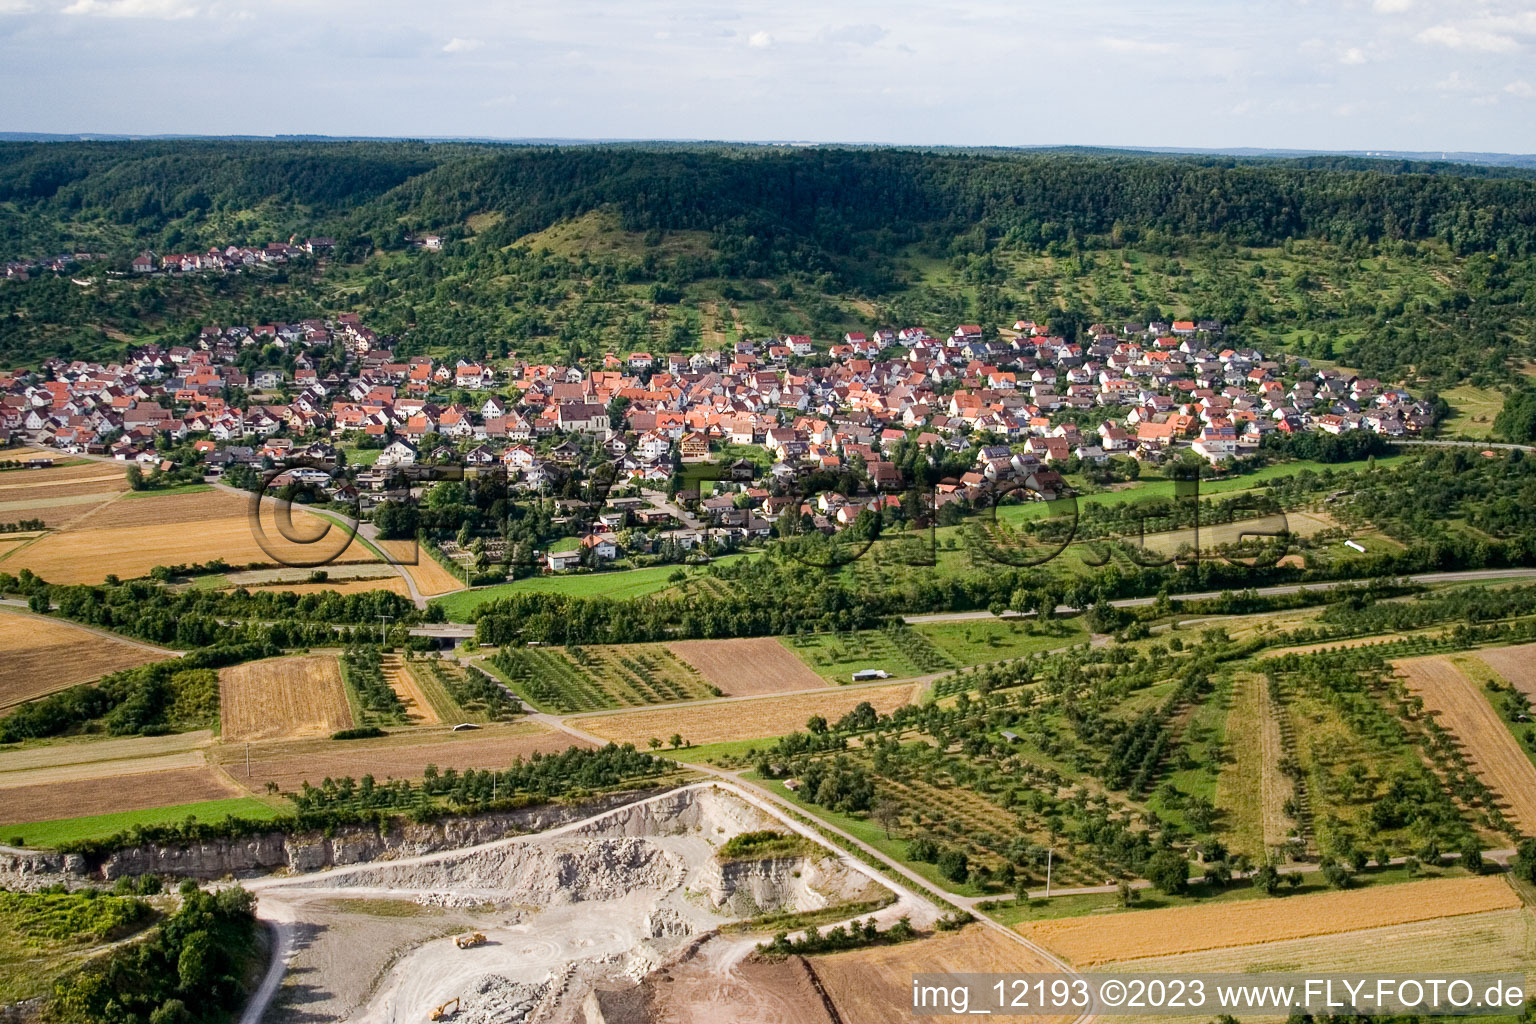 Behind the quarry in the district Kayh in Herrenberg in the state Baden-Wuerttemberg, Germany